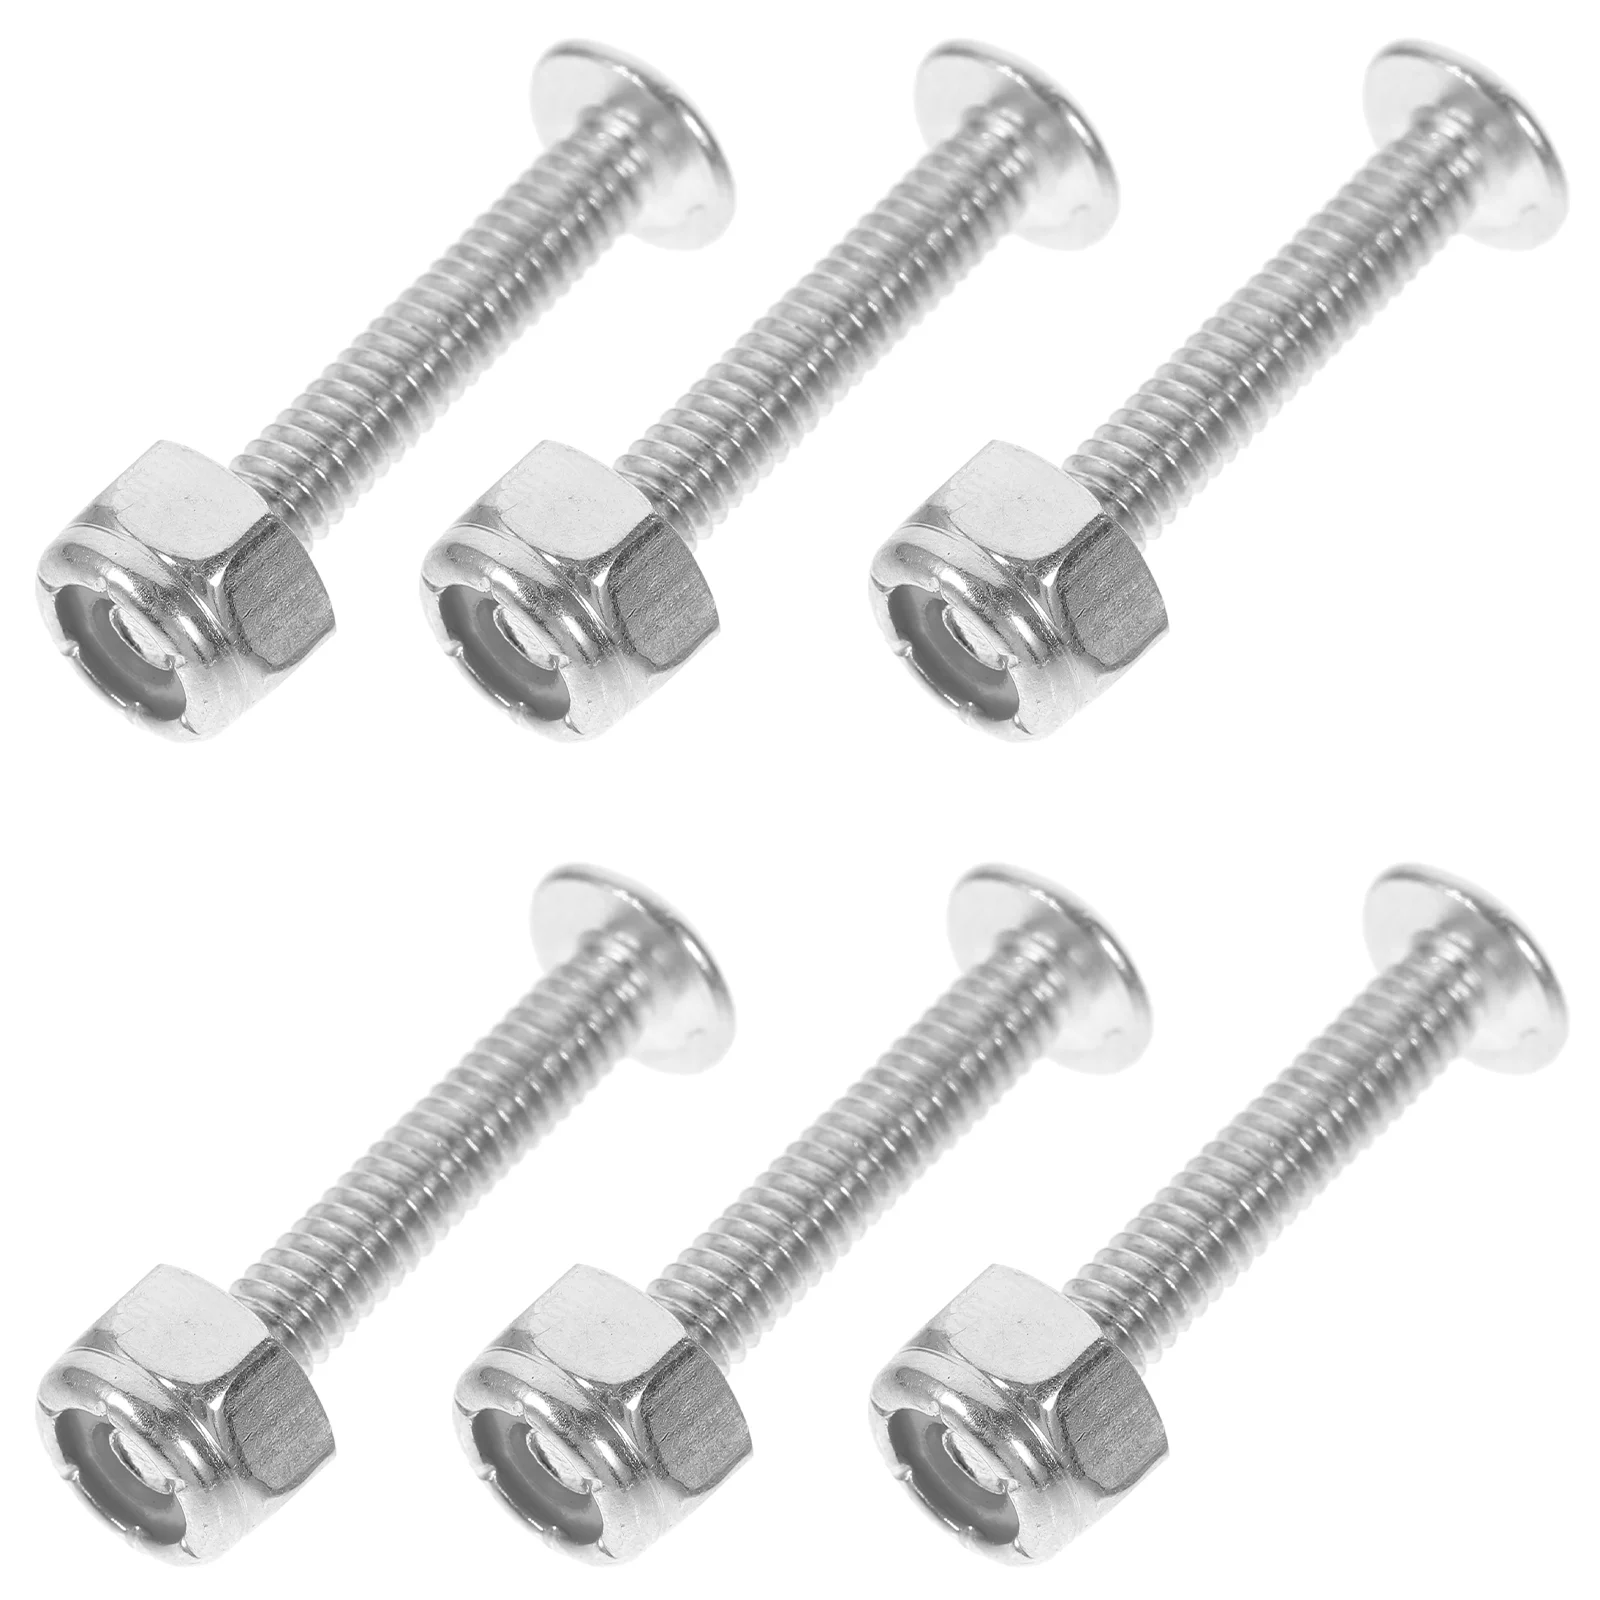 12 Pcs Practical Foosball Table Screws Component Table Football Screws Gaming Galvanized Iron Foosball Replacement Parts